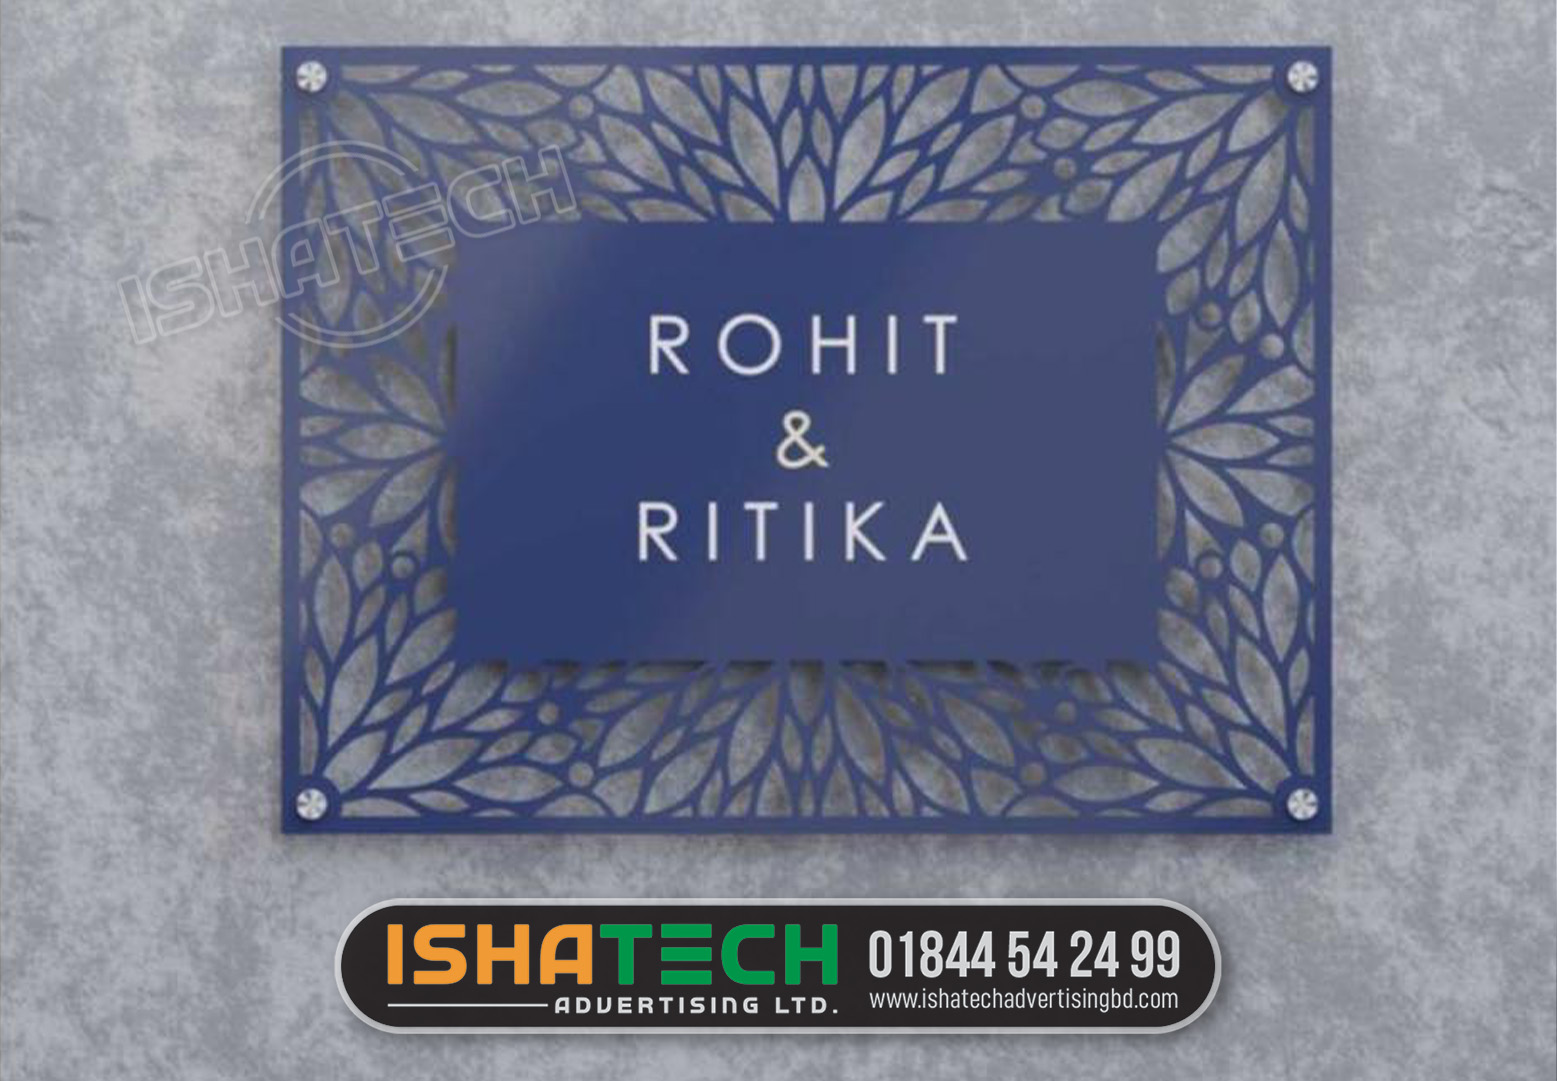 ISHATECH ADVERTISING LTD., THE LEADING OFFICE PLASTIC NAME PLATE DESIGN AND PRINTING COMPANY IN GULSHAN, BANANI, DHAKA. Phone: 01844542499